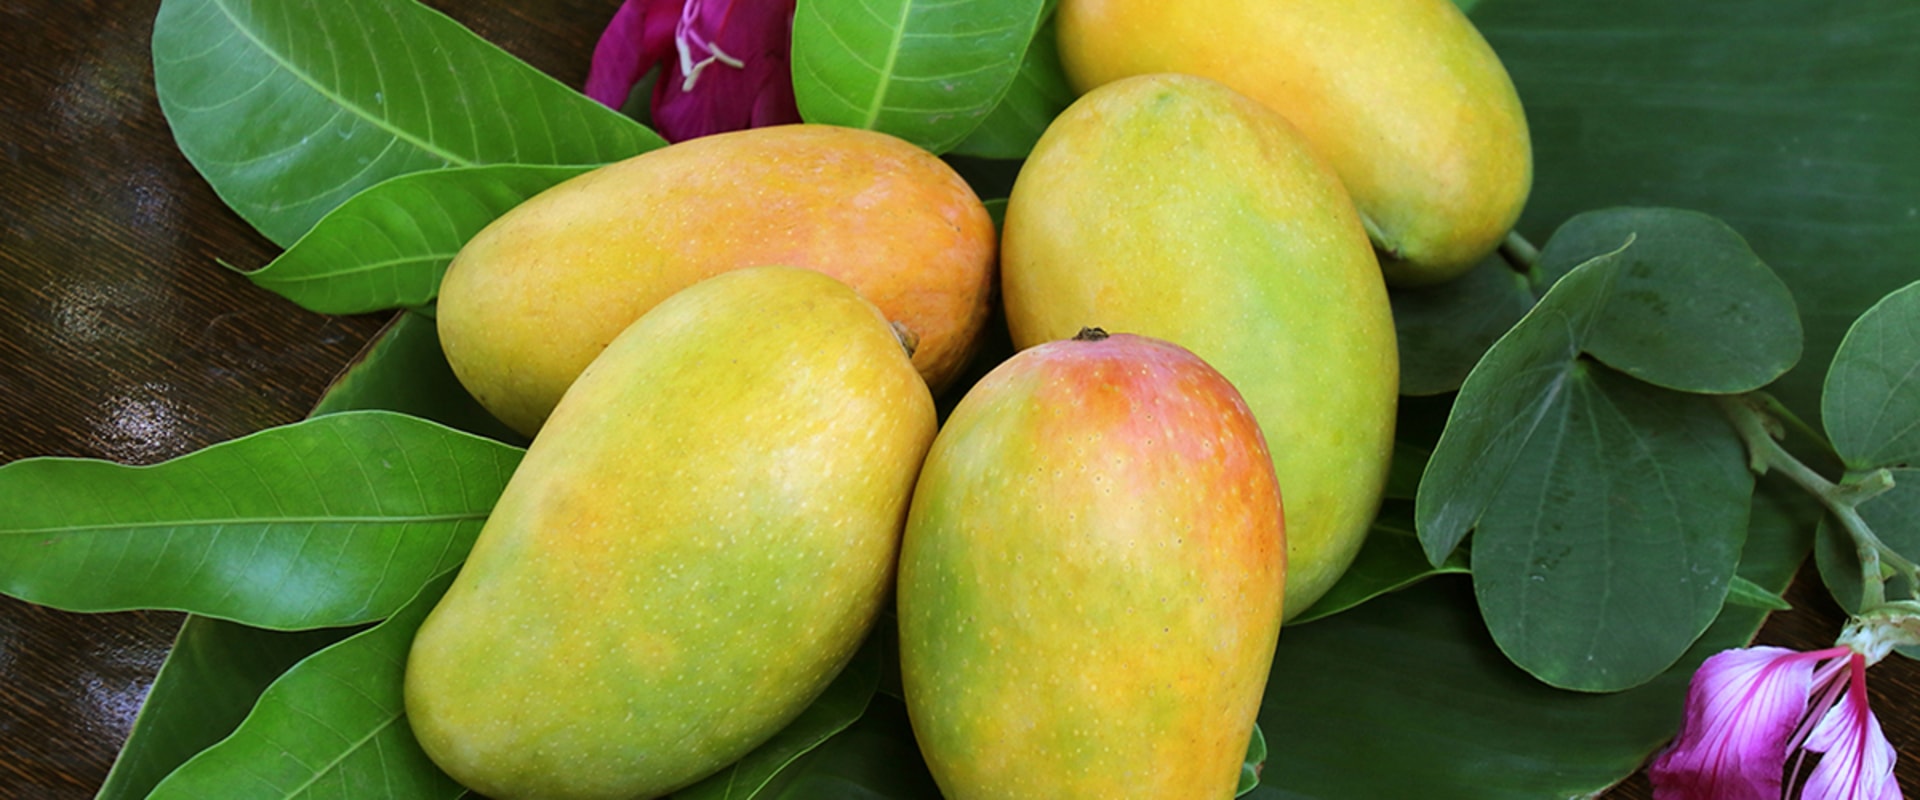 Where to Buy Wholesale Raw Mangoes